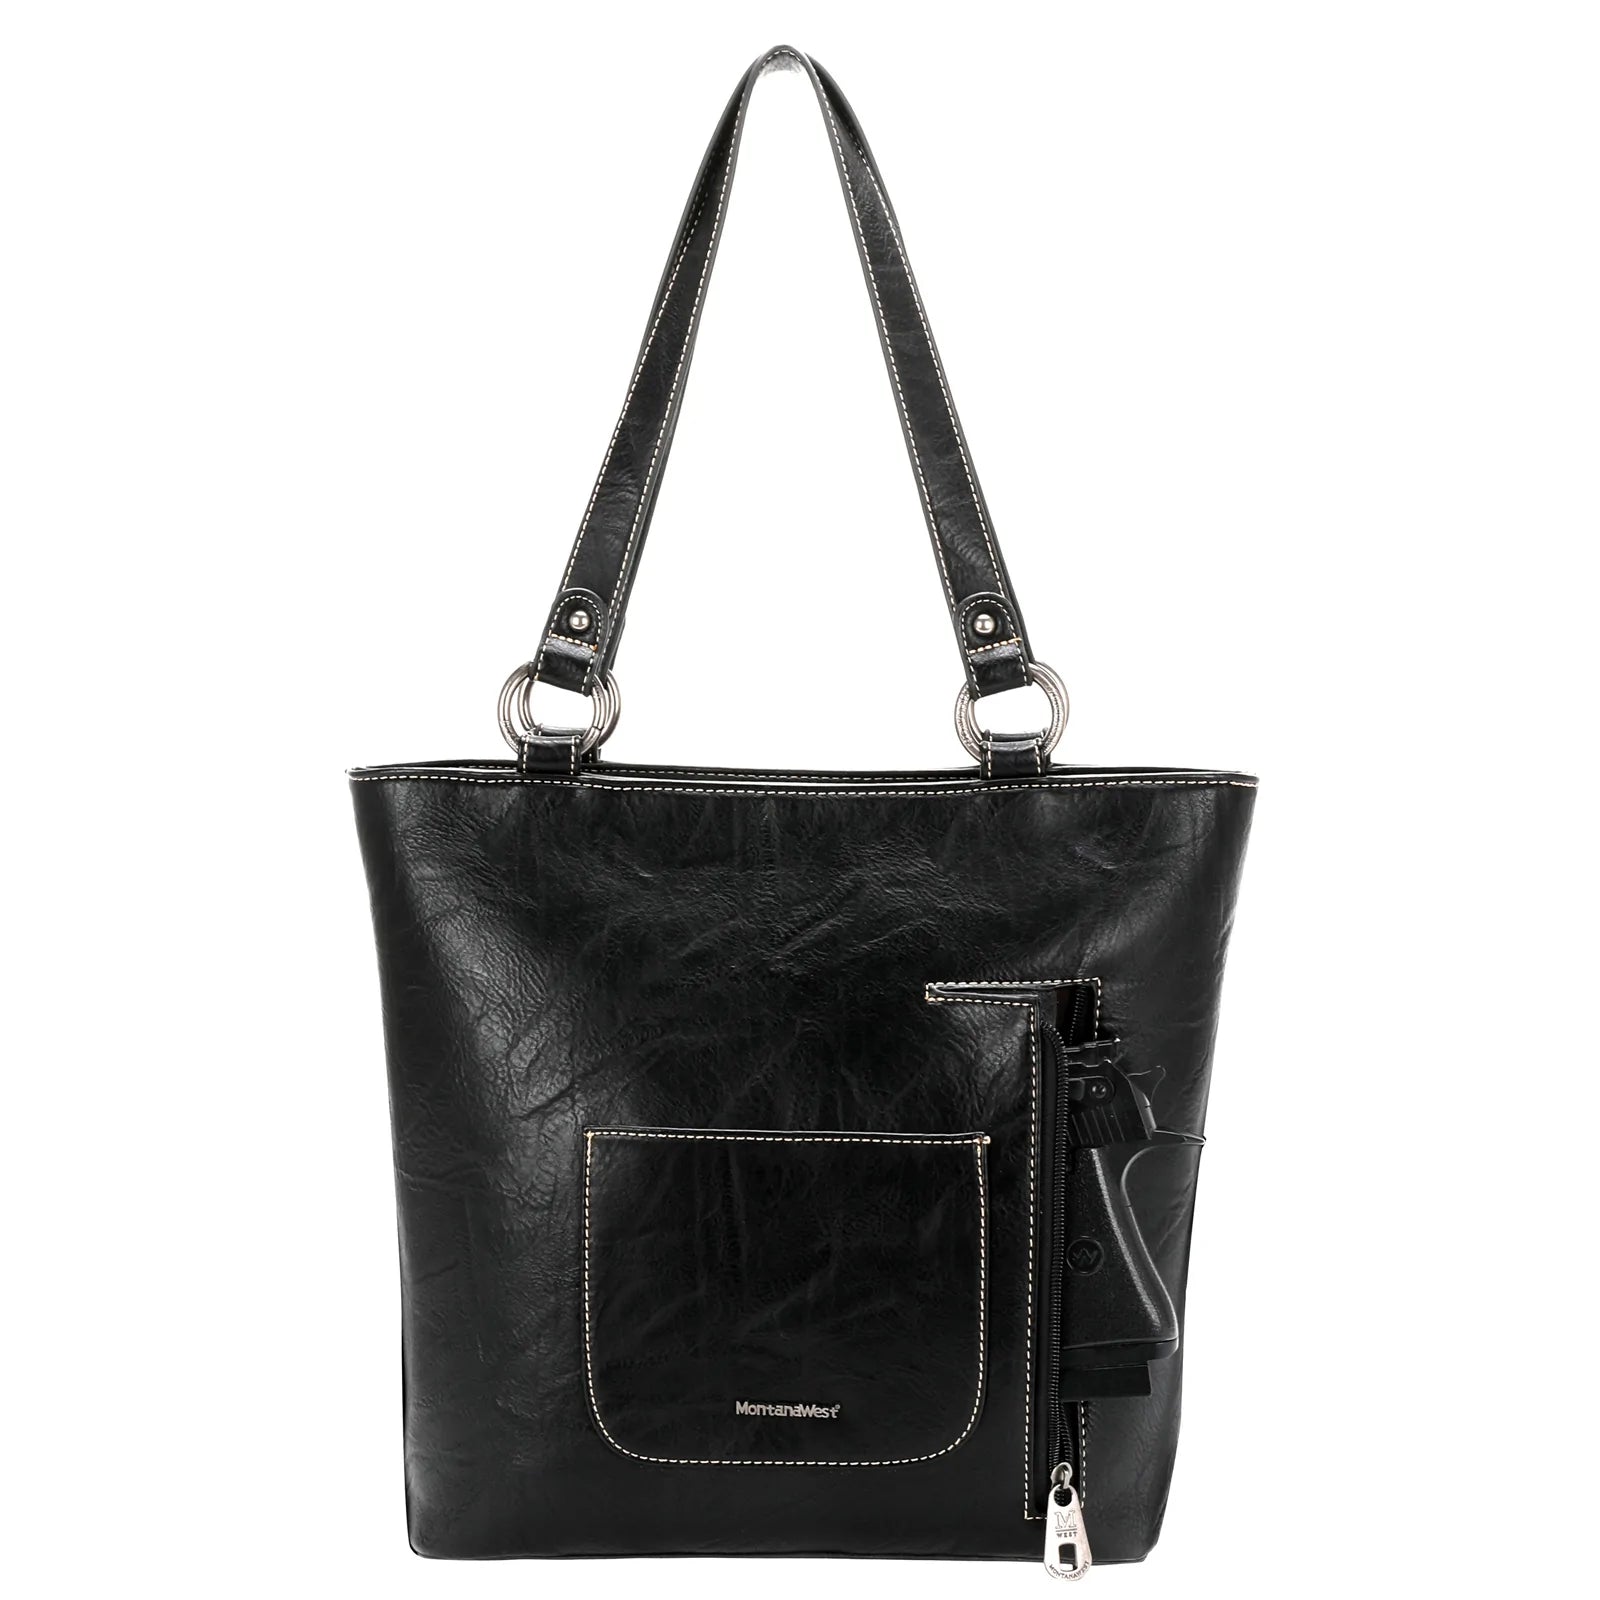 Gorgeous Black West Fringe Collection Concealed Carry Tote